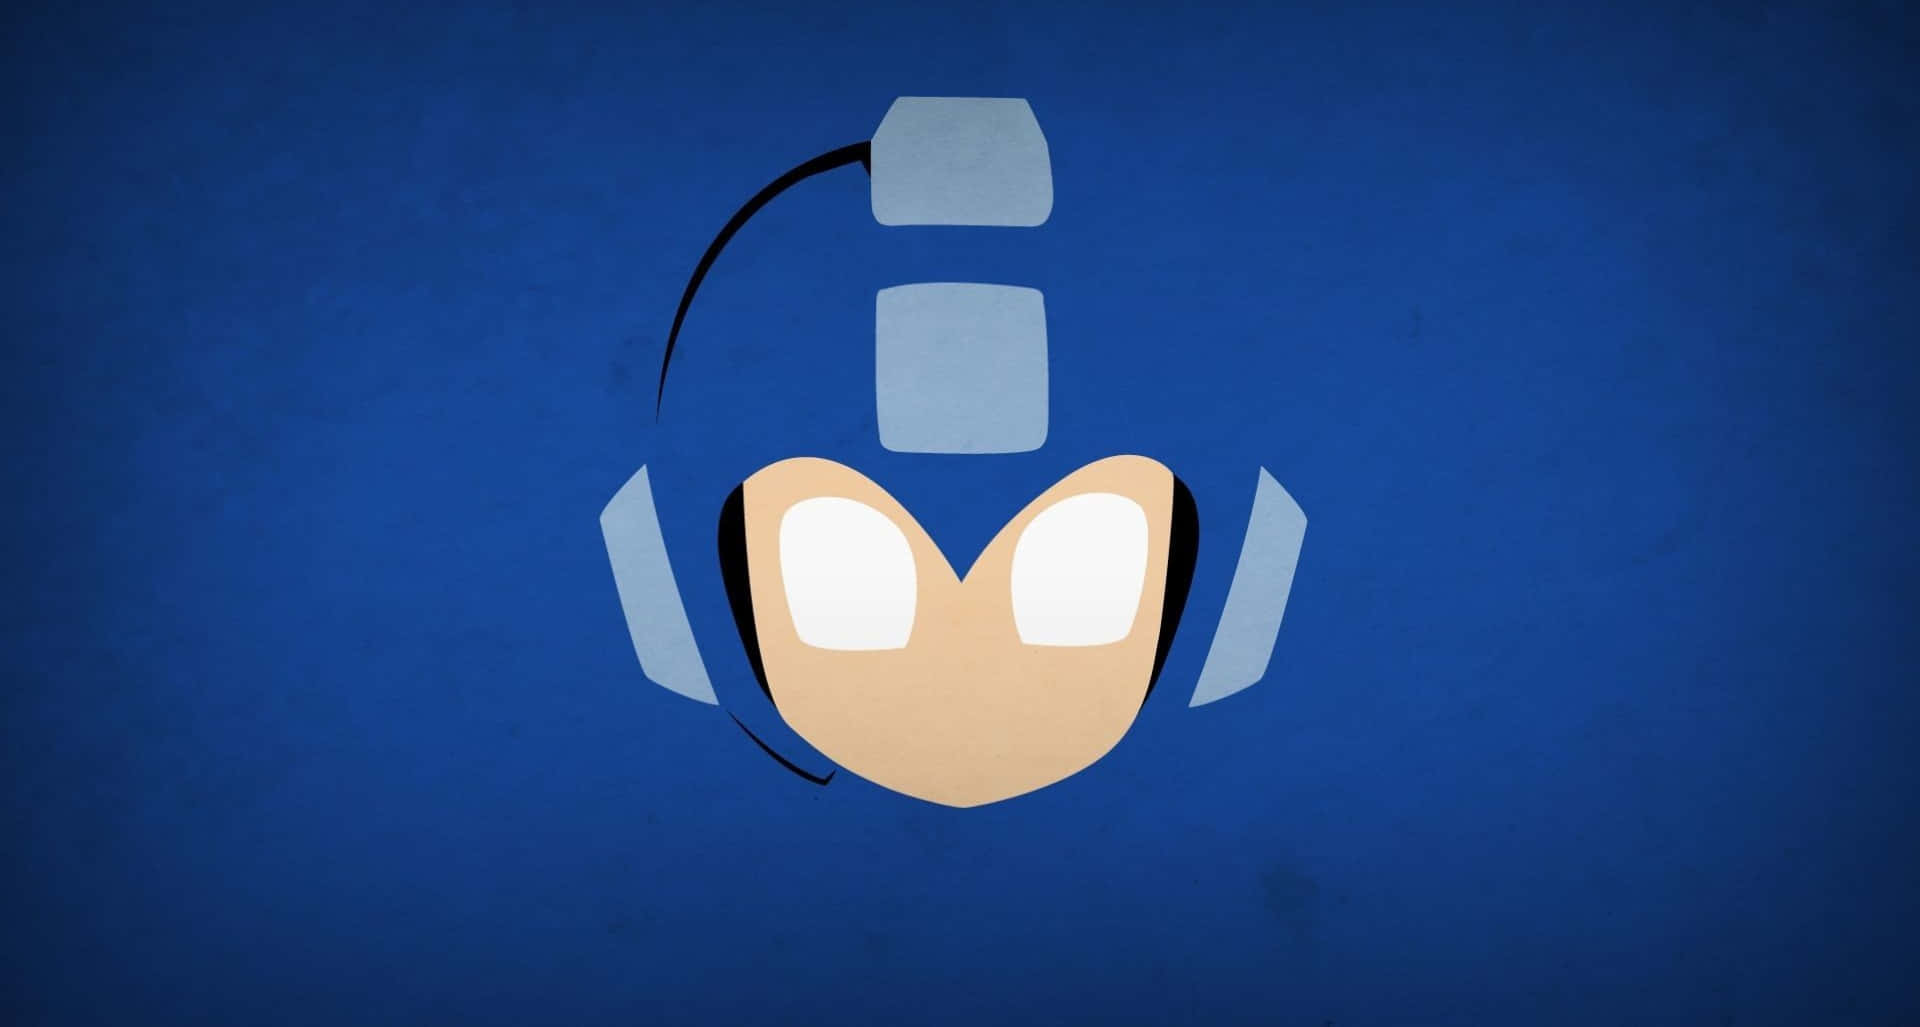 A Blue And White Sonic The Hedgehog With A Blue Head Wallpaper